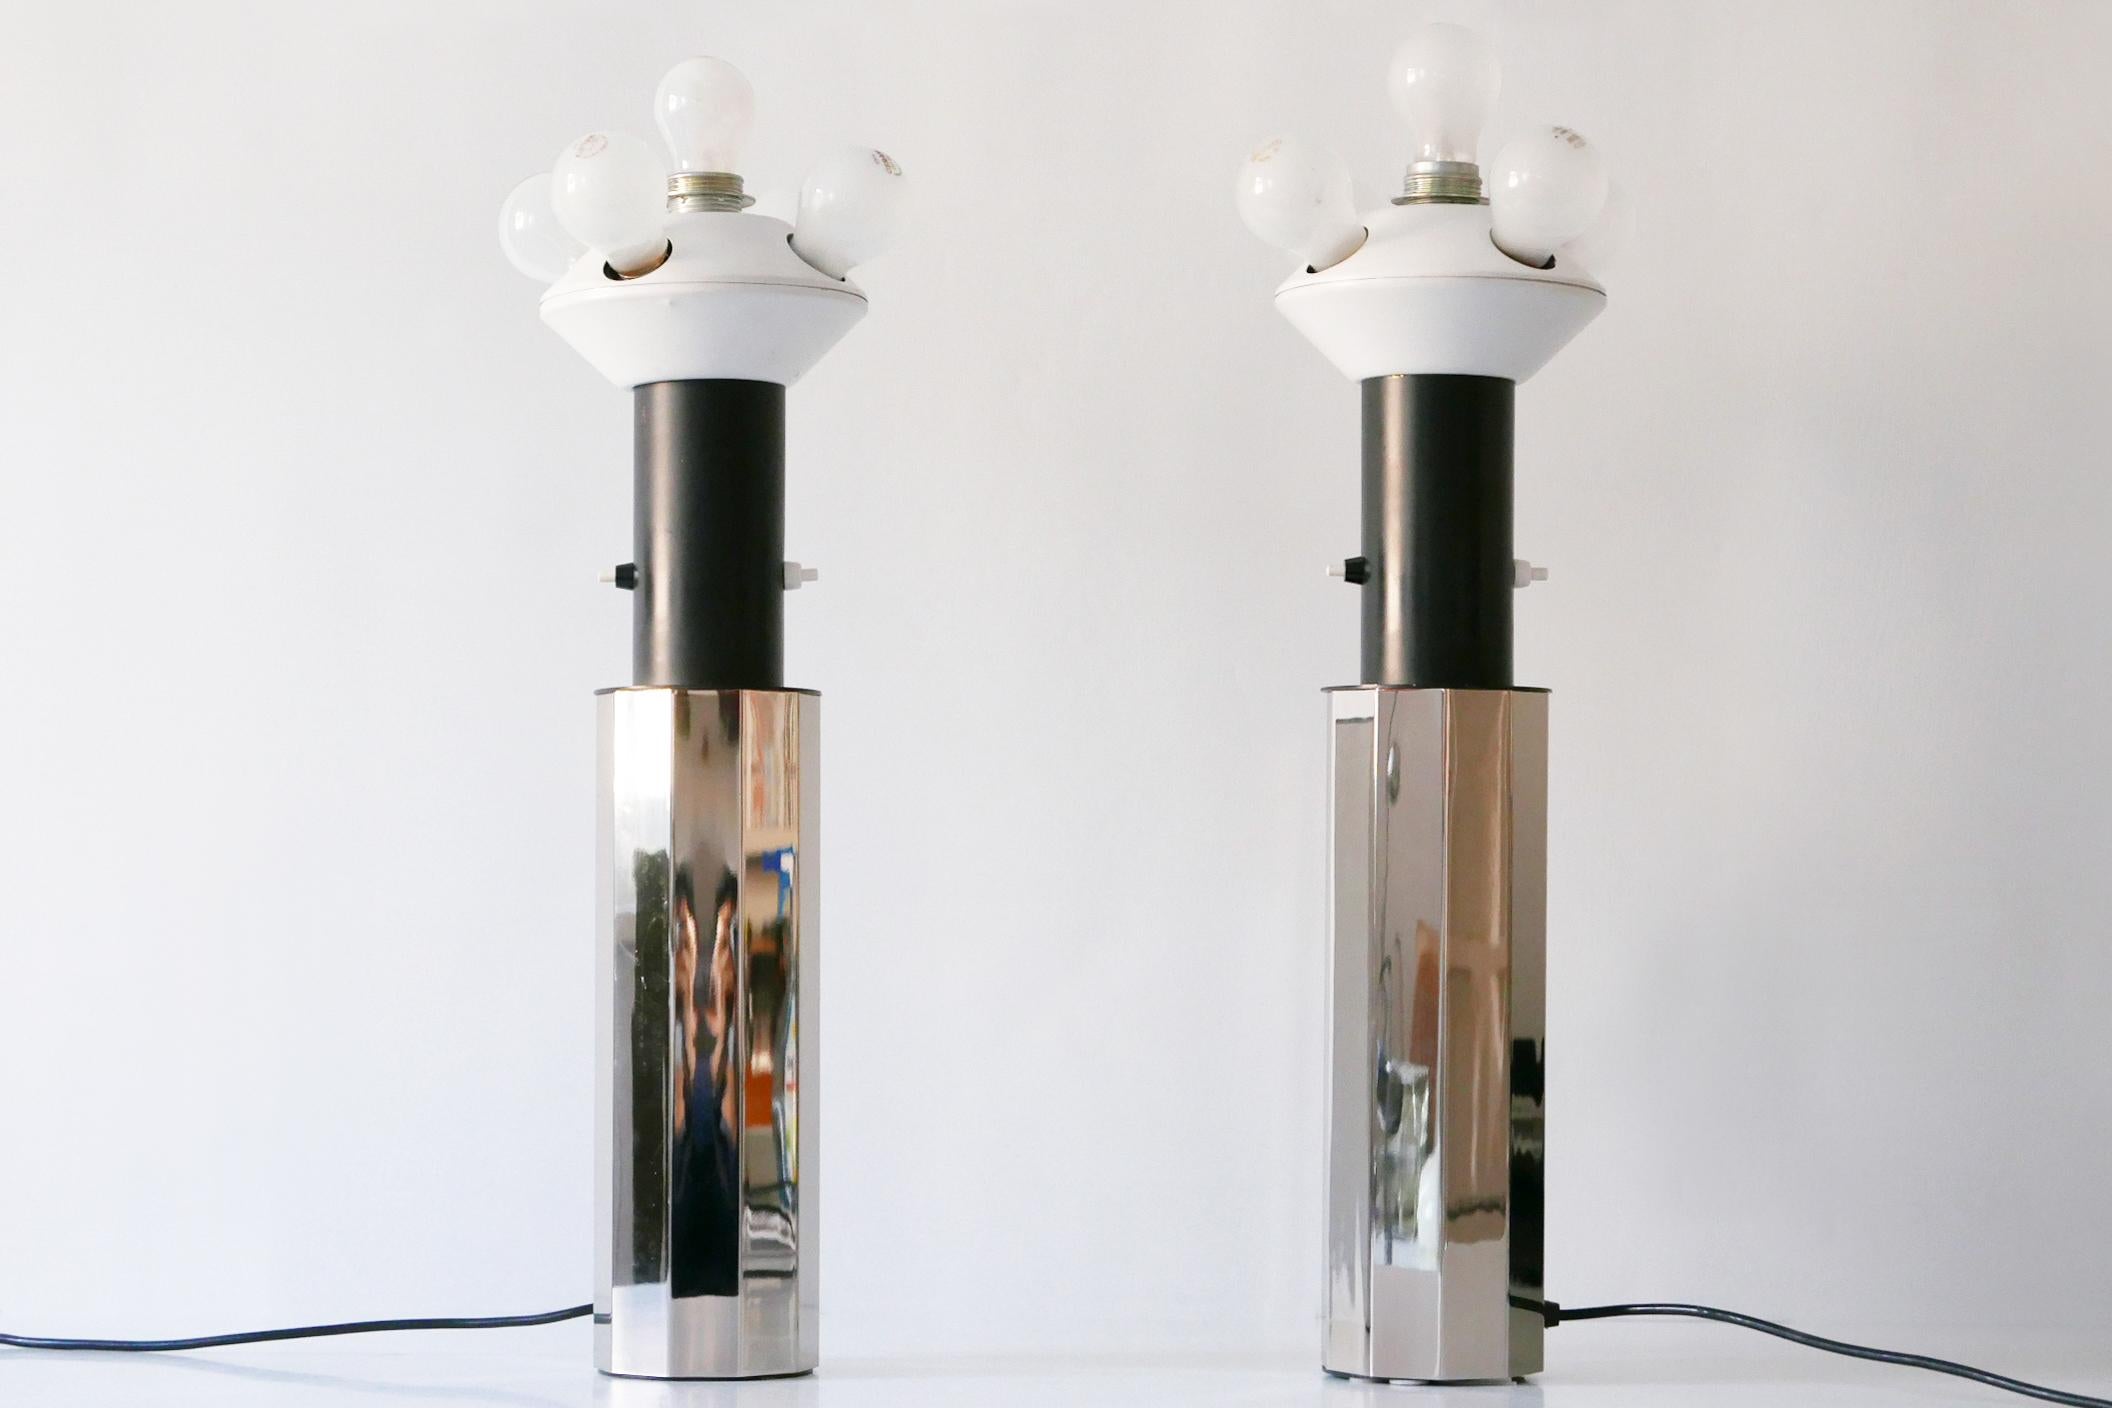 Set of Two Huge, 5-Flamed Midcentury Decagonal Chrome Table Lamps 1960s, Germany For Sale 7